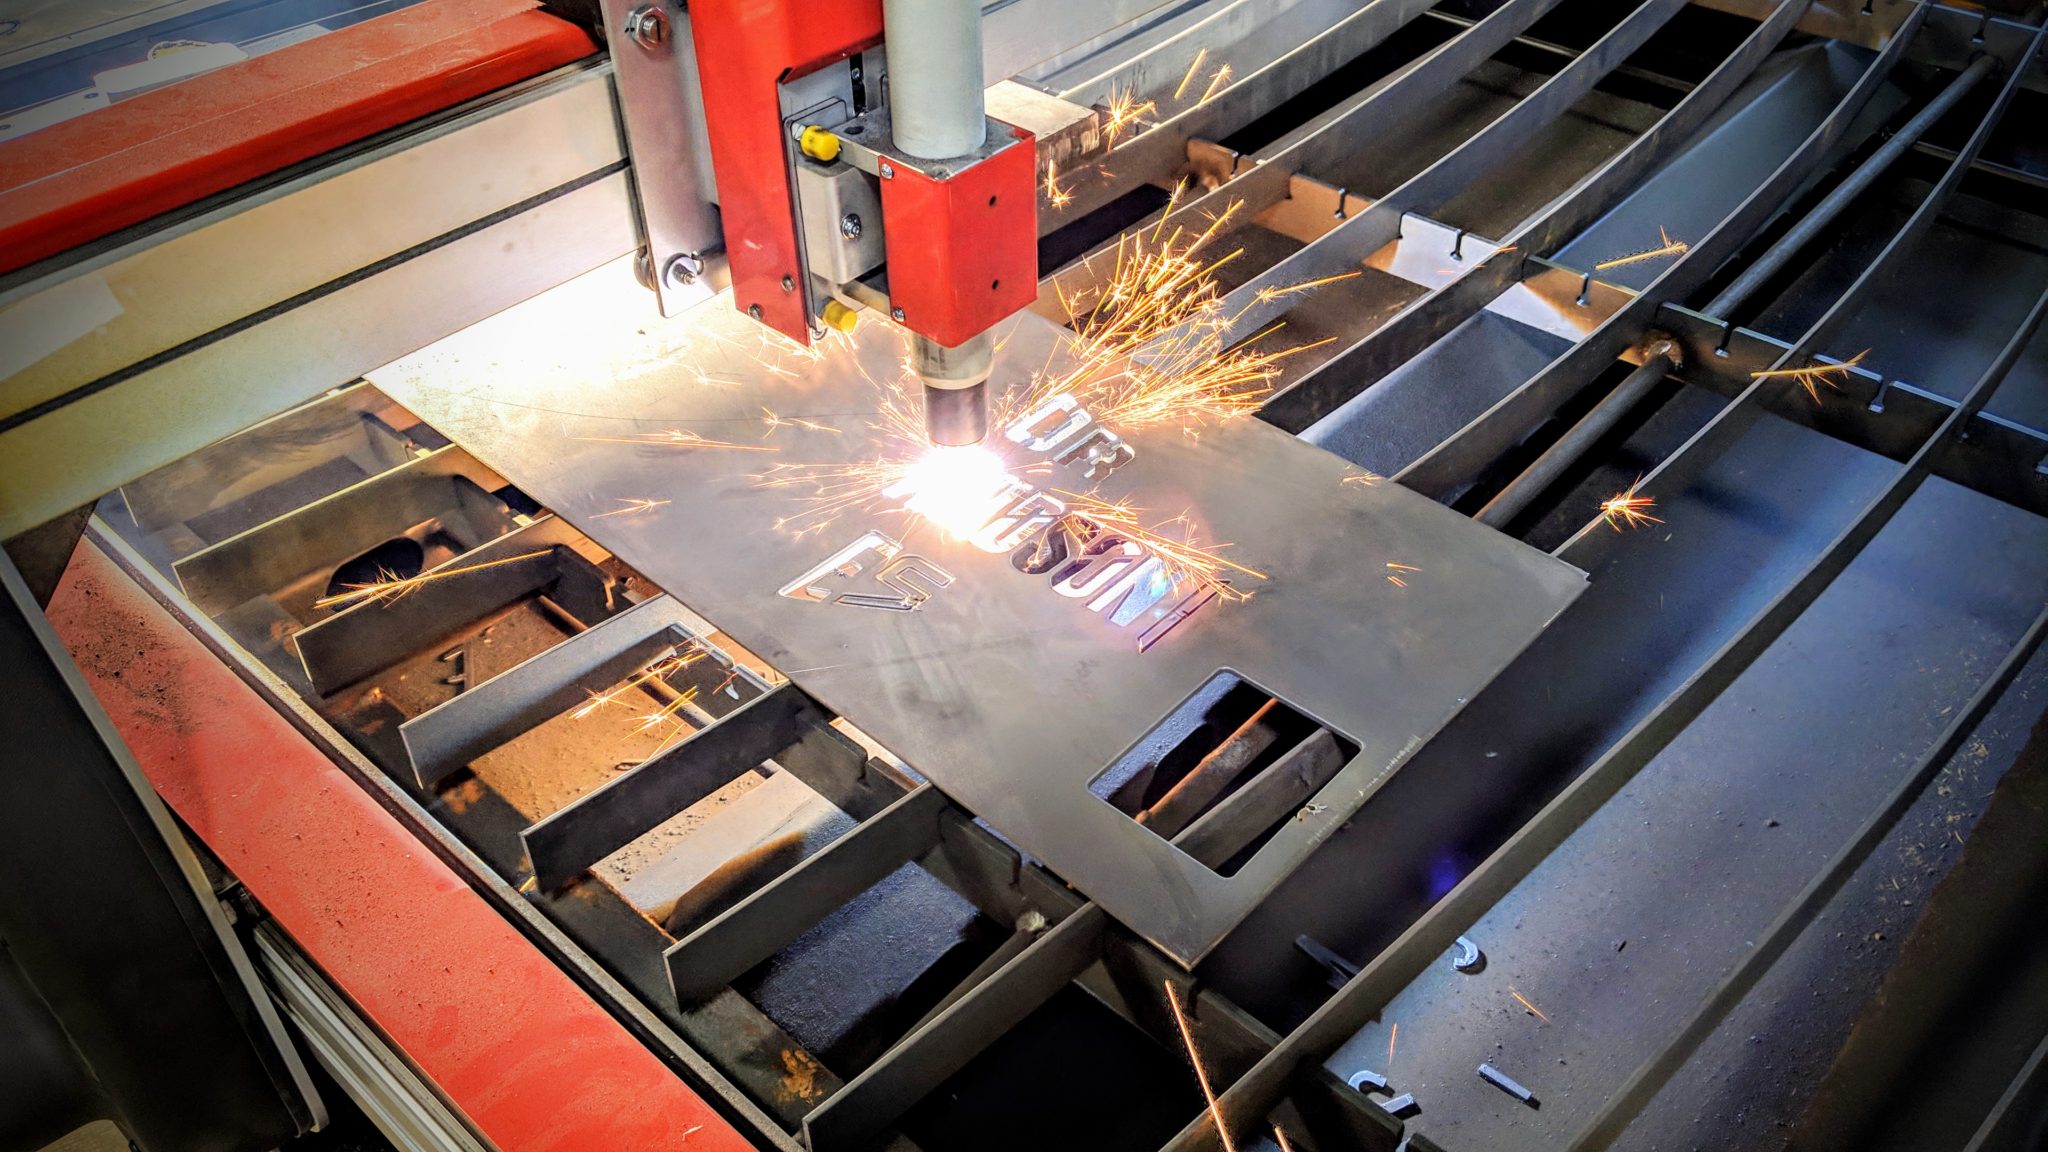 Ble.CH Messe Bern demonstration of the Swift-Cut machine cutting the metal with sparks